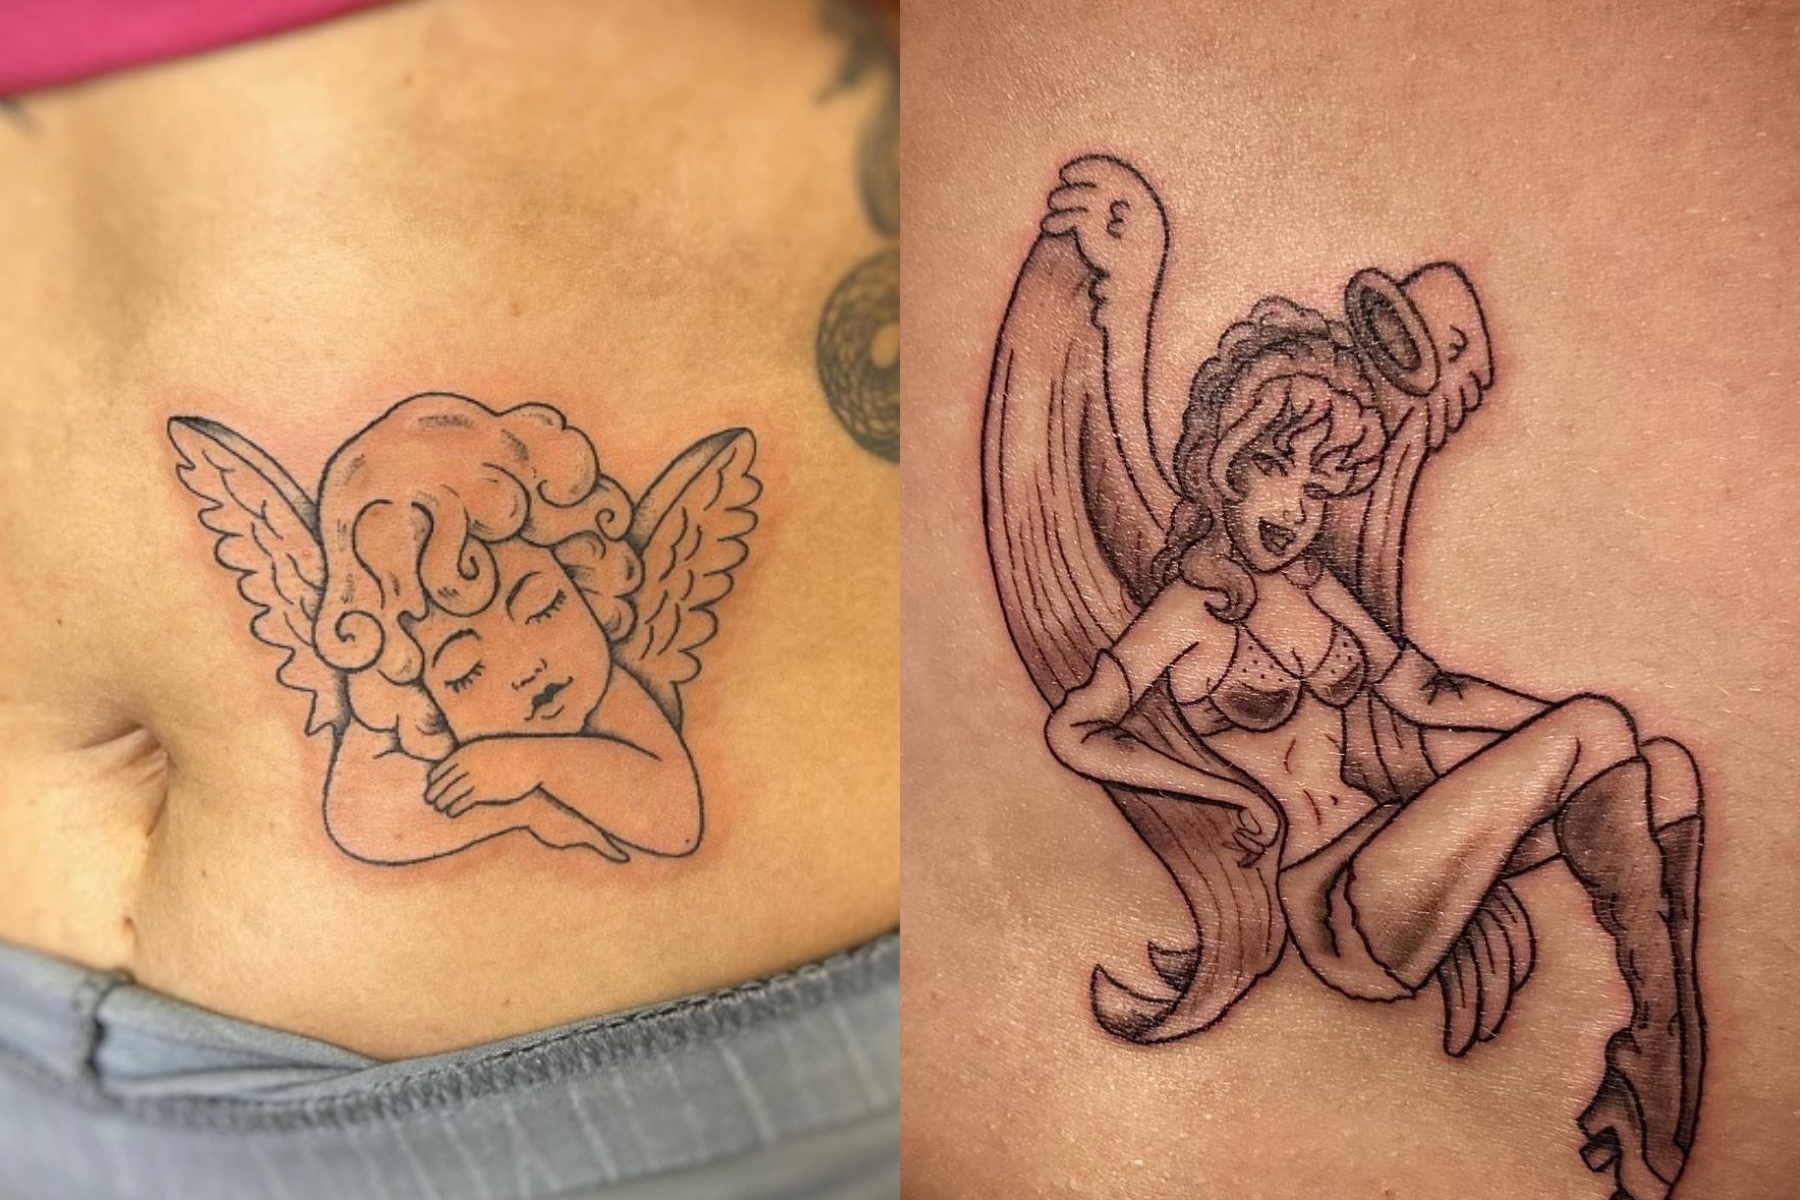 Ladies with a side angel wings tattoo